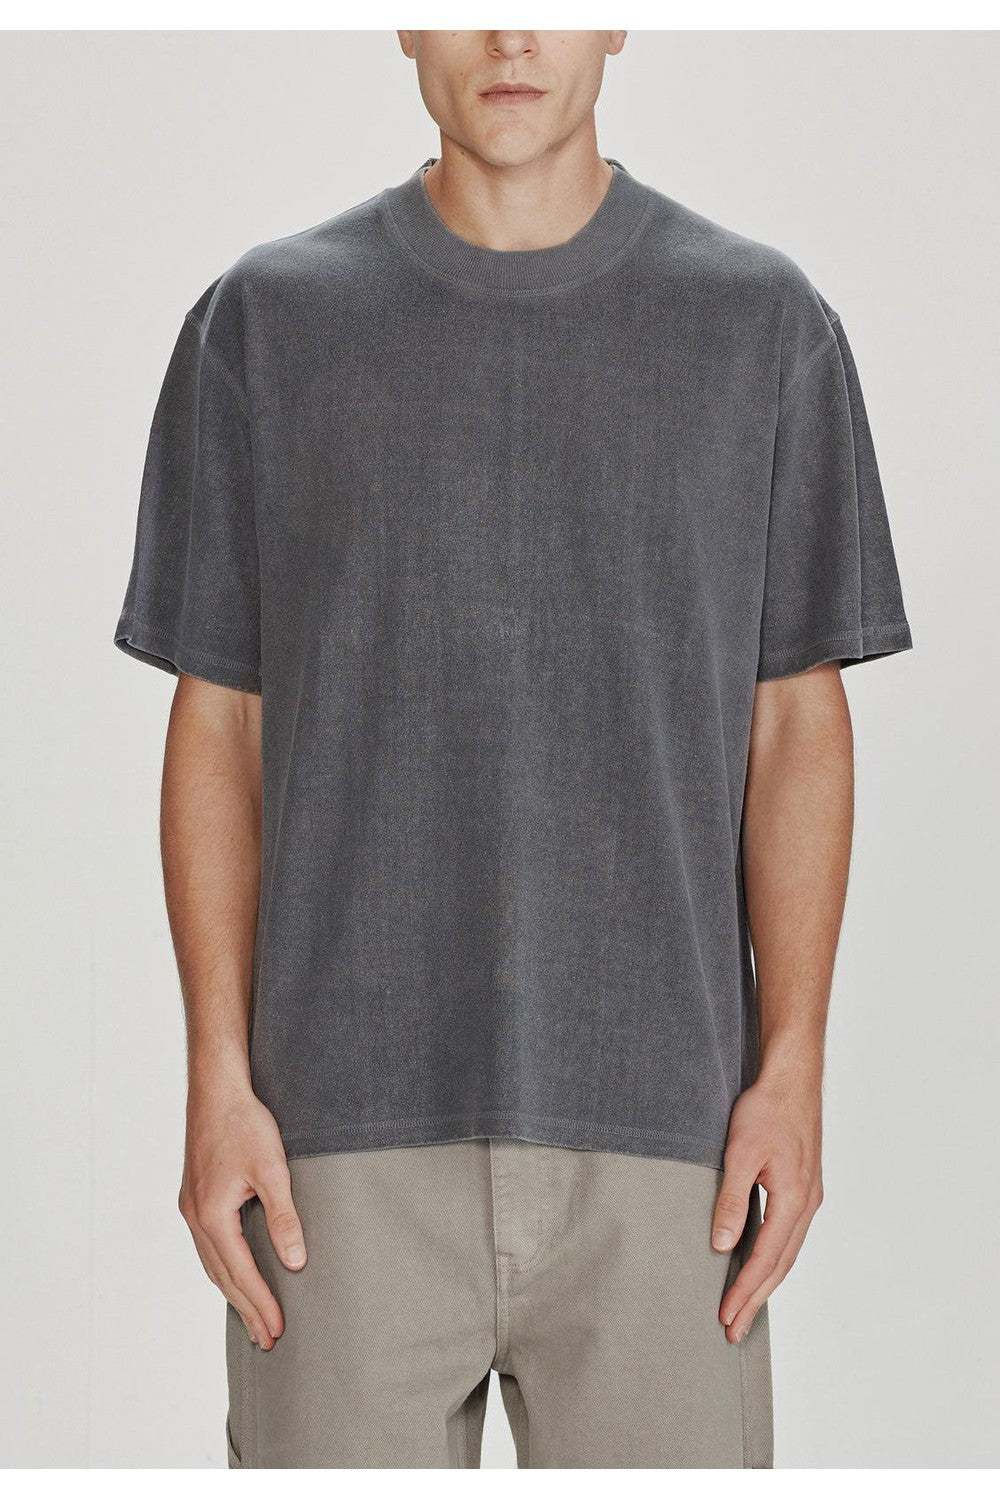 Commoners Hemp Jersey SS Tee - Vintage River | COMMONERS | Mad About The Boy